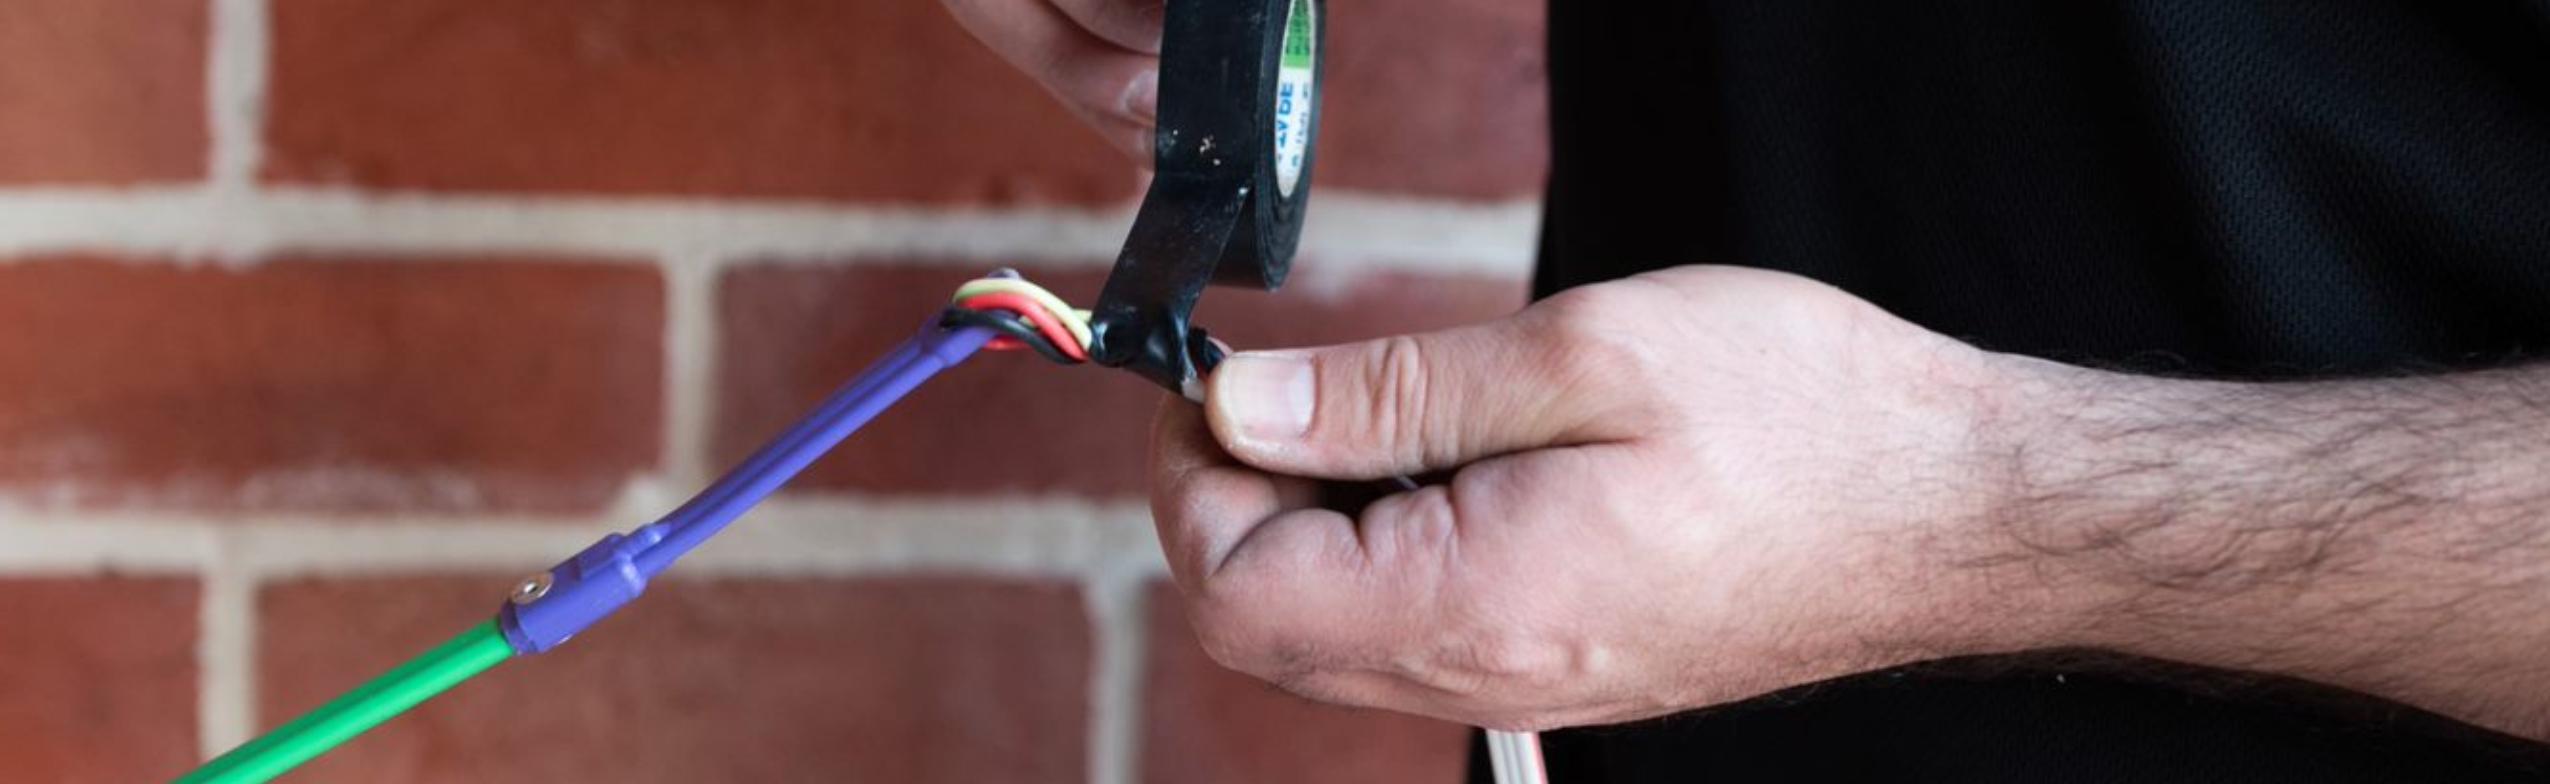 an electrician using electrical tape to attach a fish tape to a wire.